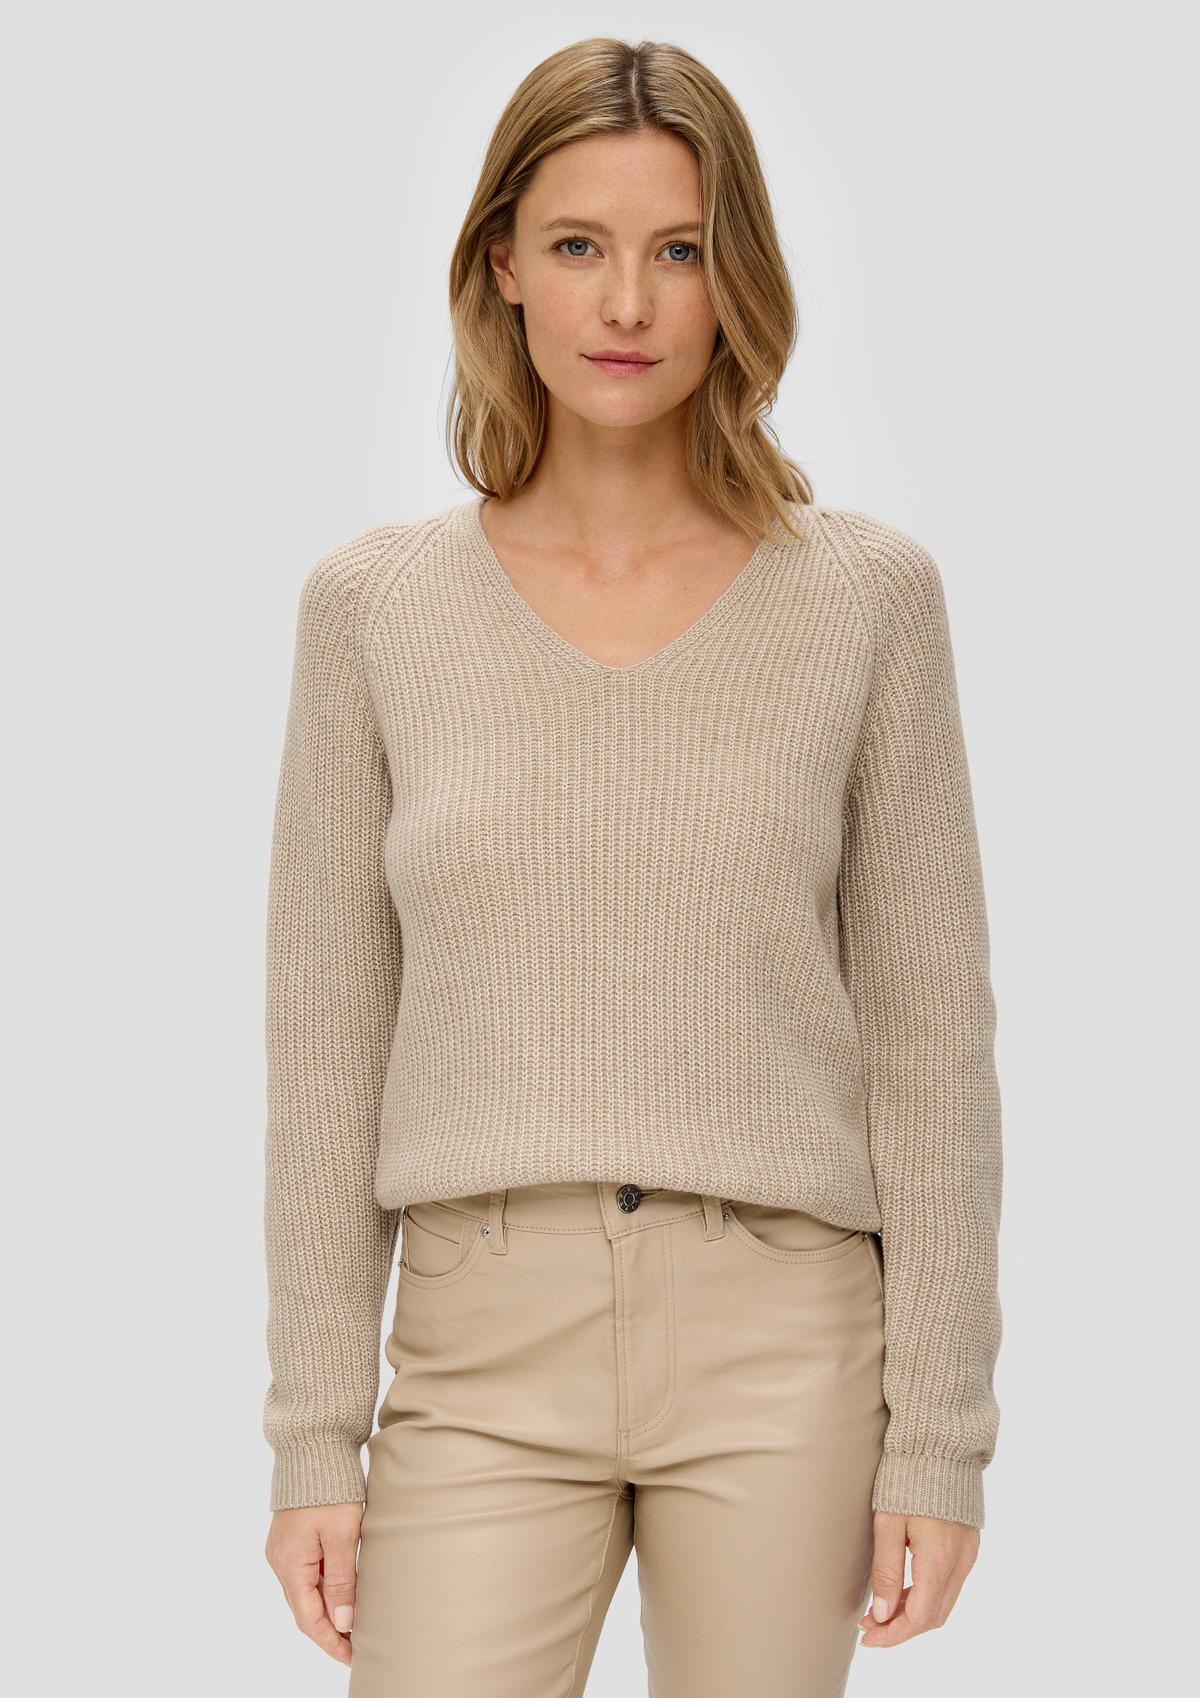 Knit jumper with a ribbed texture